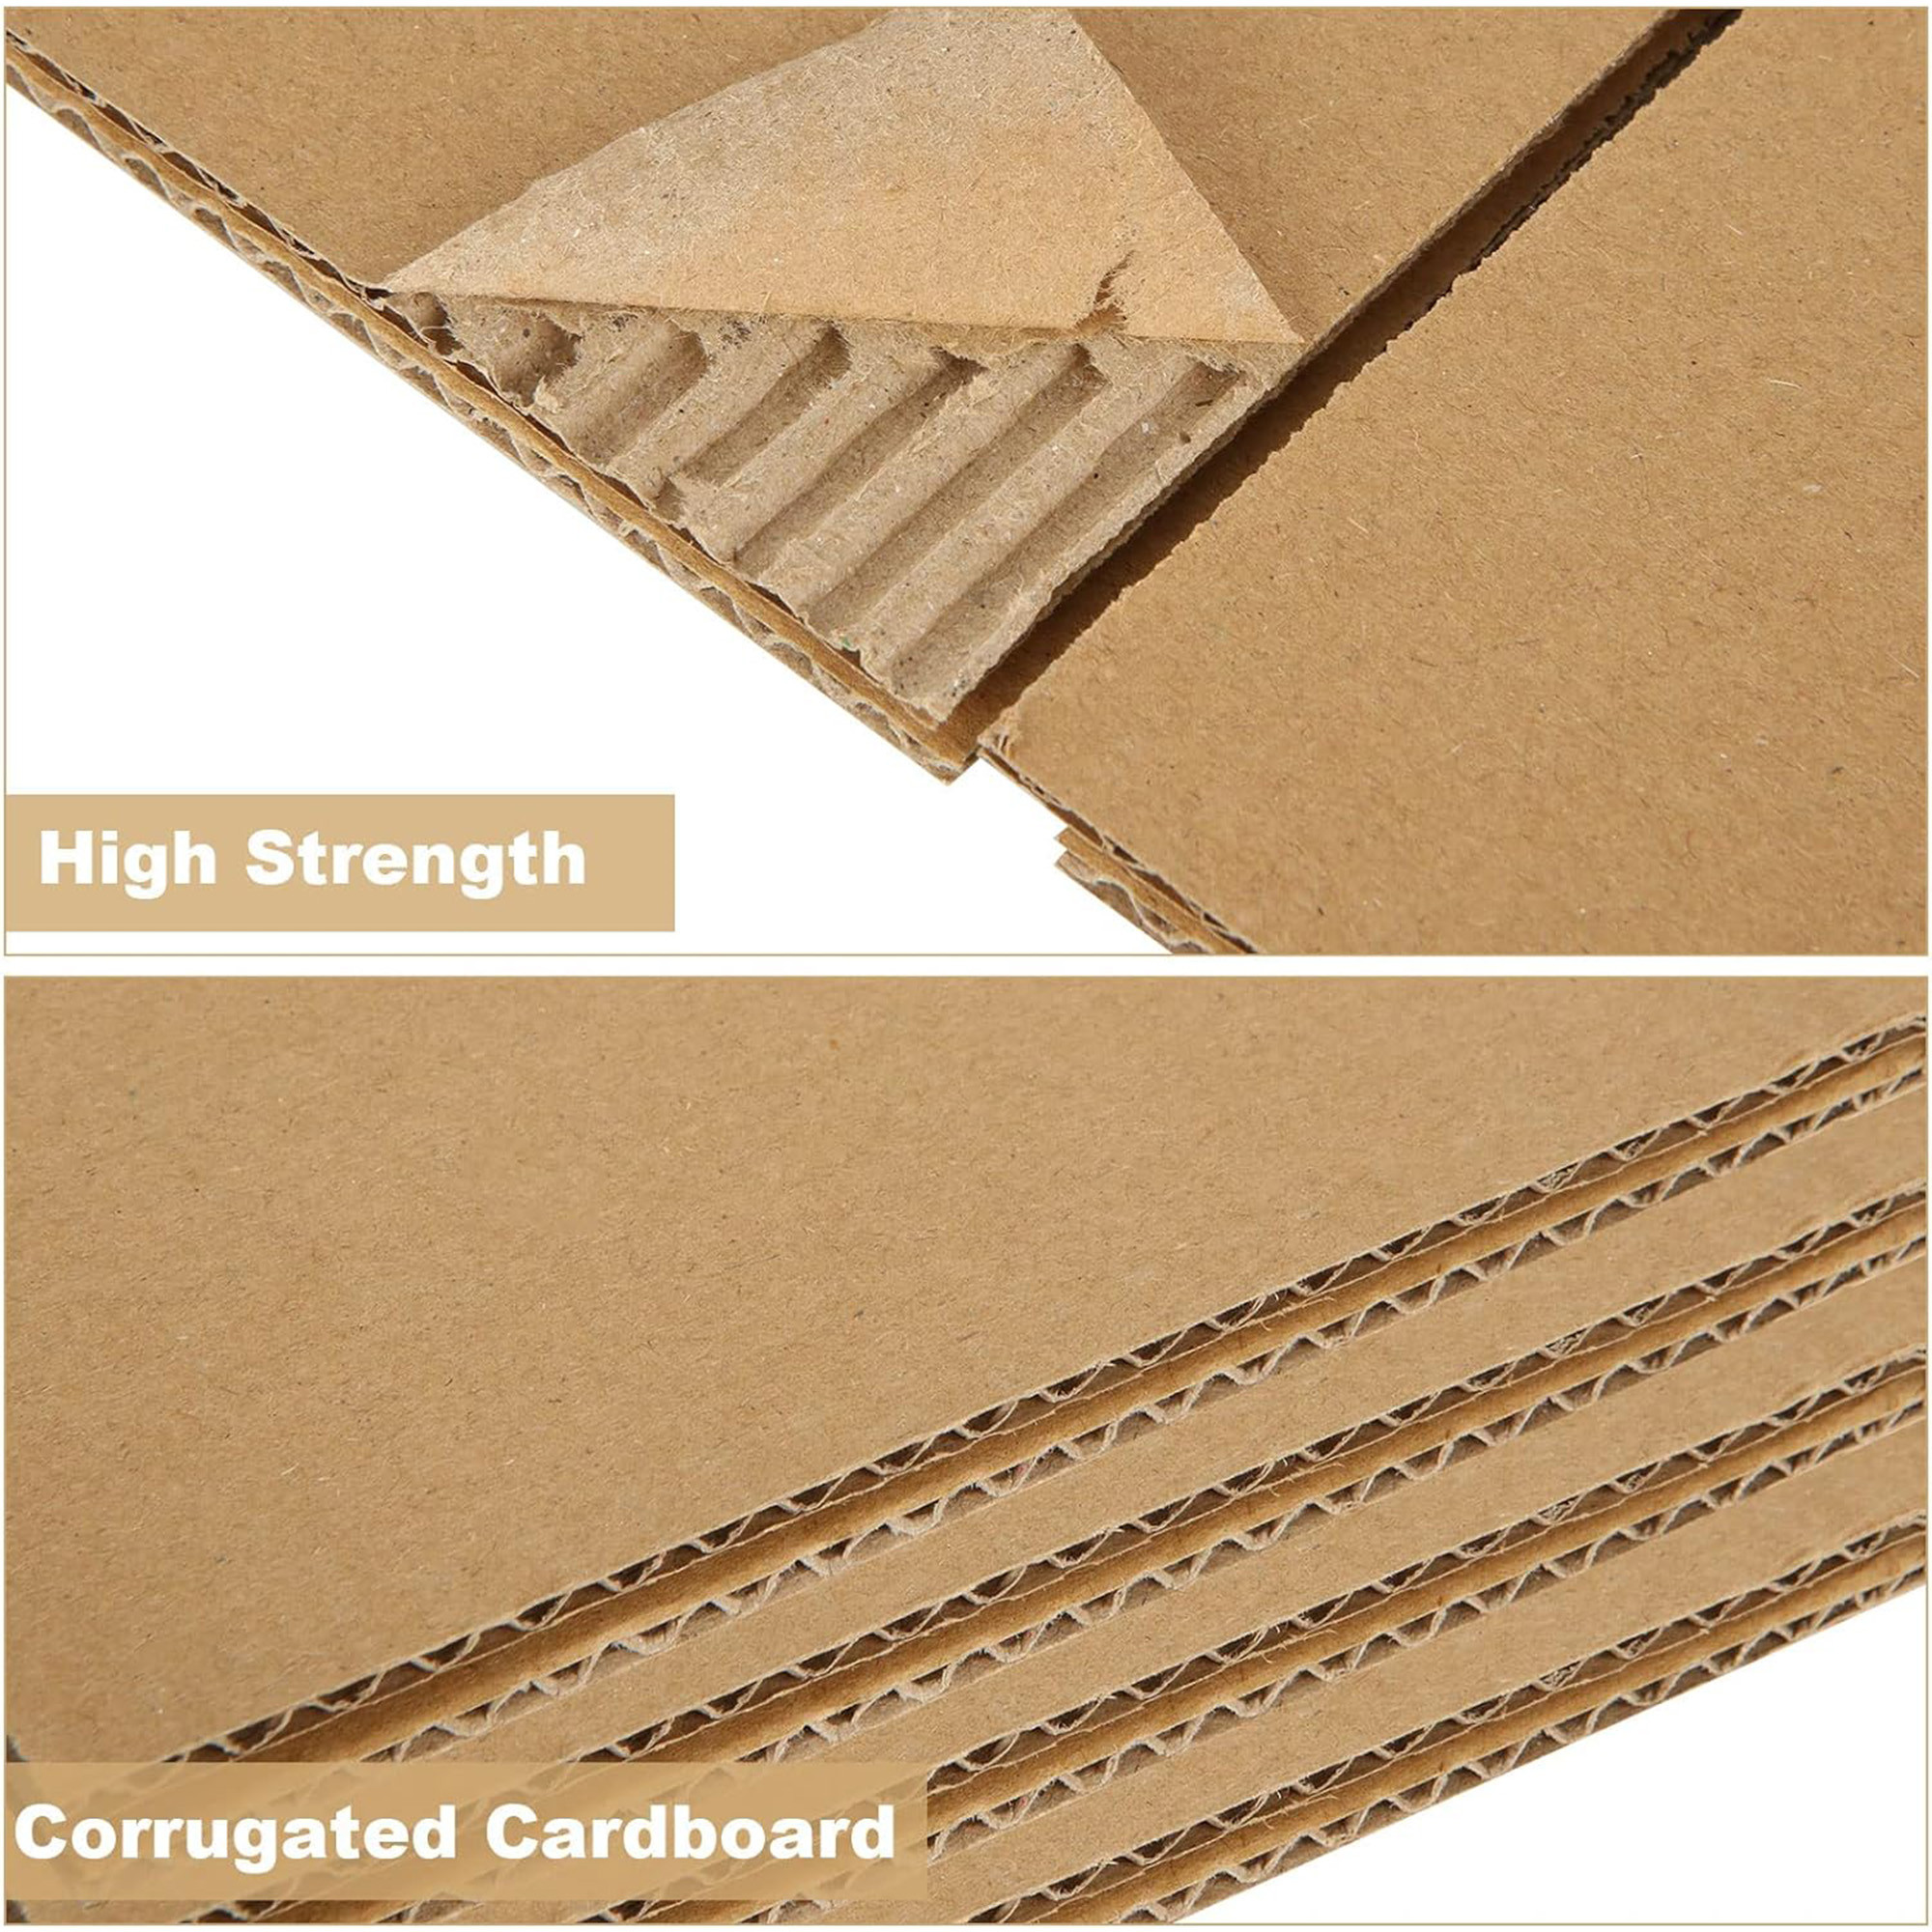 Kuber Industries Corrugated Box | 3 Ply Corrugated Packing Box | Corrugated for Shipping | Corrugated for Courier & Goods Transportation | L 18.5 x W 15.5 x H 15.5 Inch| Brown